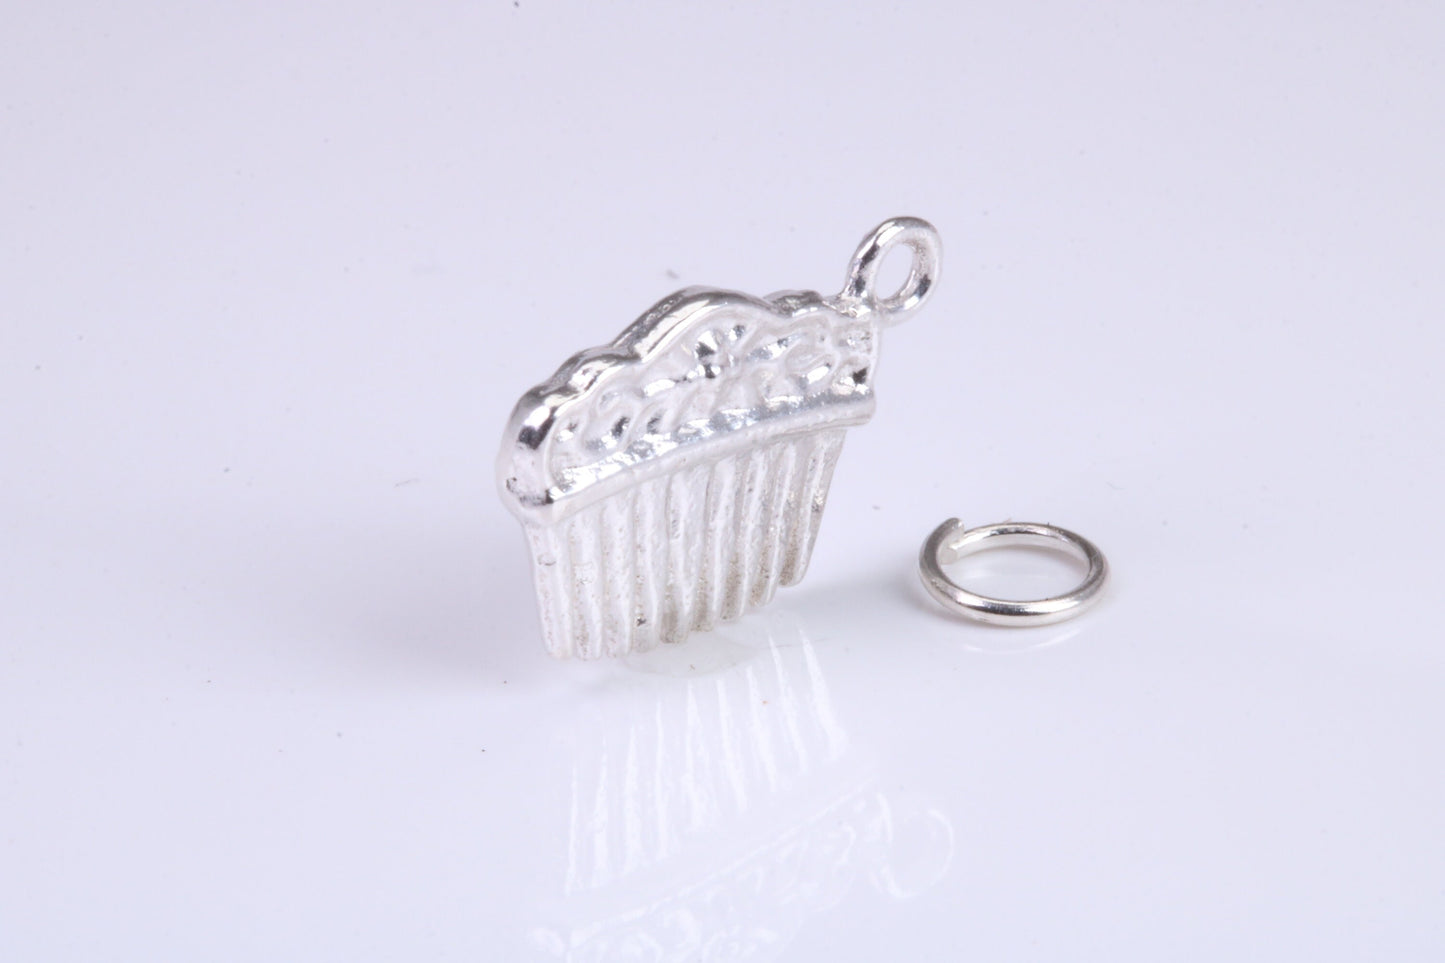 Hair Comb Charm, Traditional Charm, Made from Solid 925 Grade Sterling Silver, Complete with Attachment Link